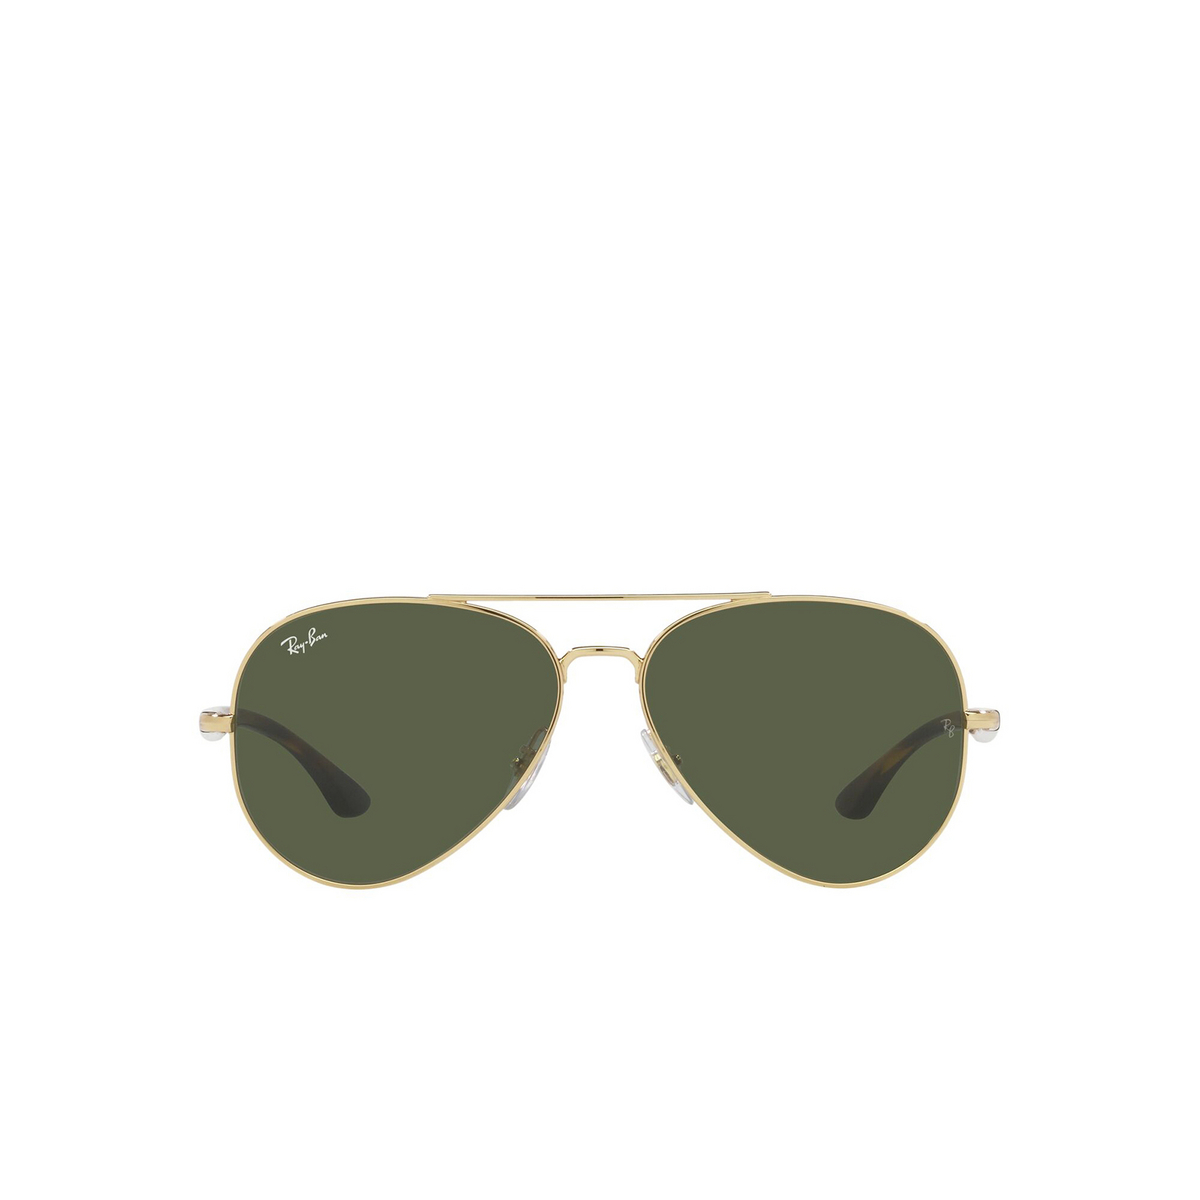 Ray-Ban® Aviator Sunglasses: RB3675 color Arista 001/31 - front view.